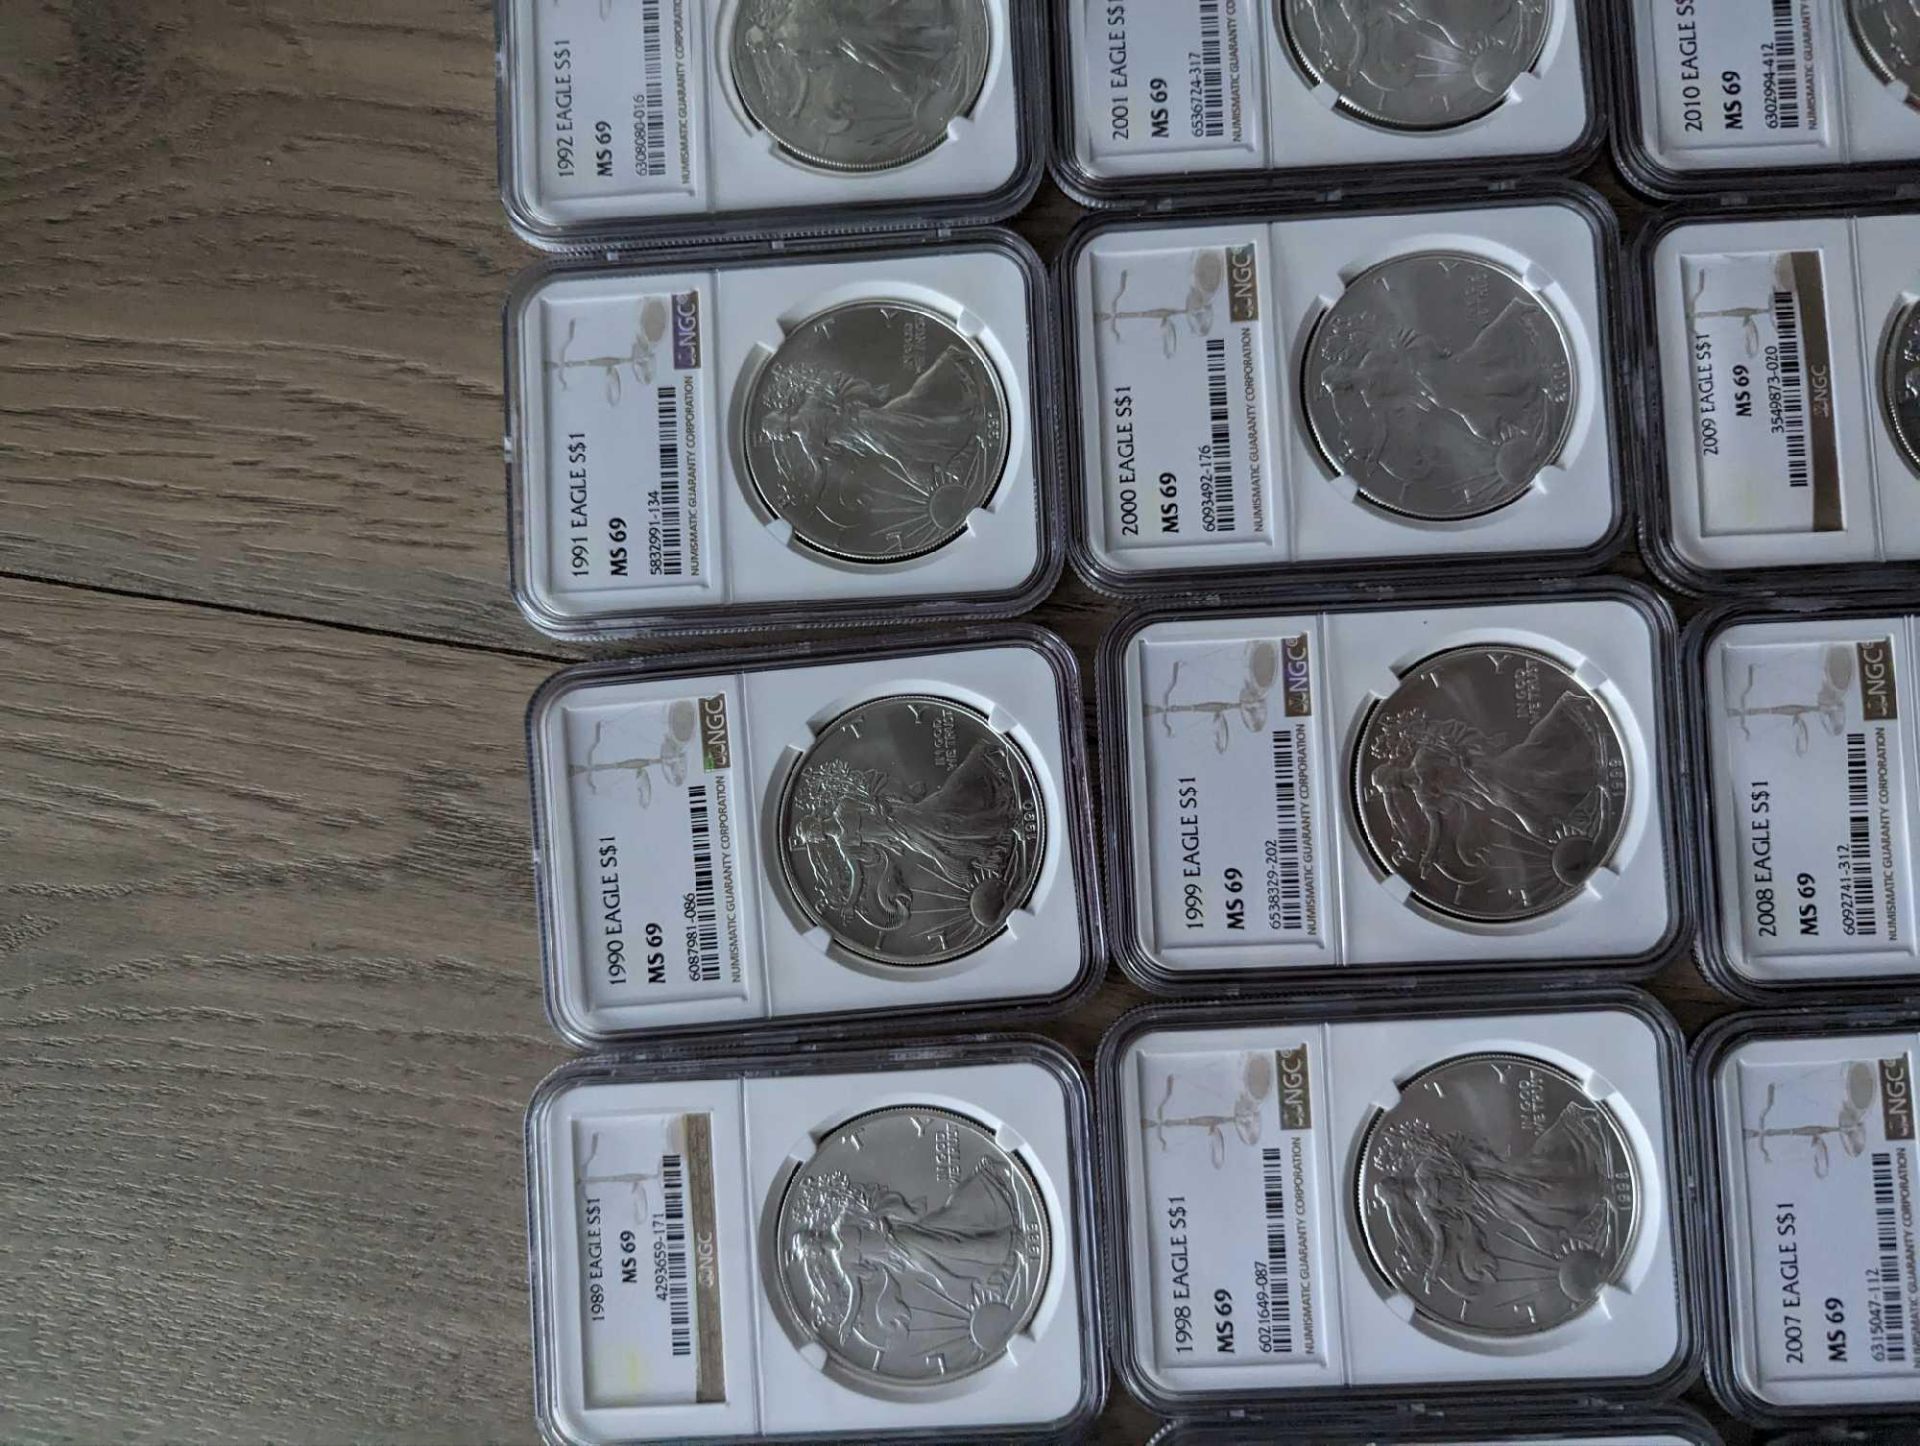 1986 to 2022. complete silver eagle PCGS set in boxes (37 eagles in sequential order) - Image 20 of 22